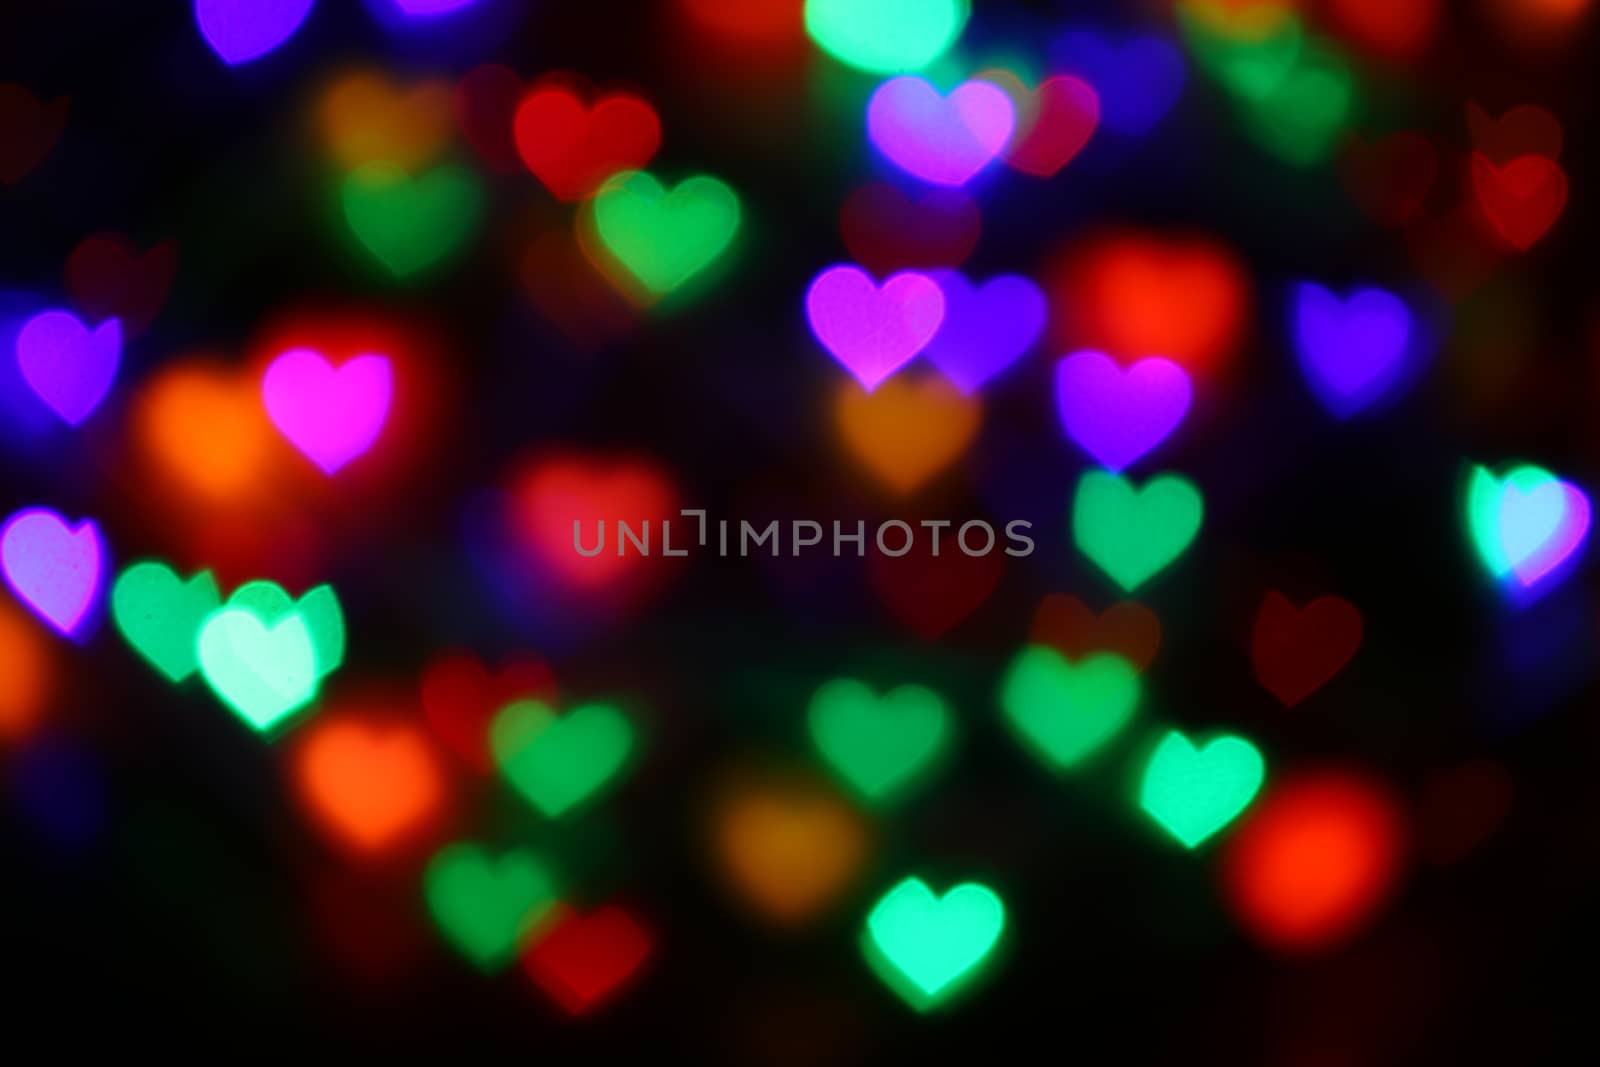 Colorful heart-shaped bokeh on black background lighting bokeh for decoration at night backdrop wallpaper blur valentine, Love Pictures background, Lighting heart shaped soft night abstract by cgdeaw